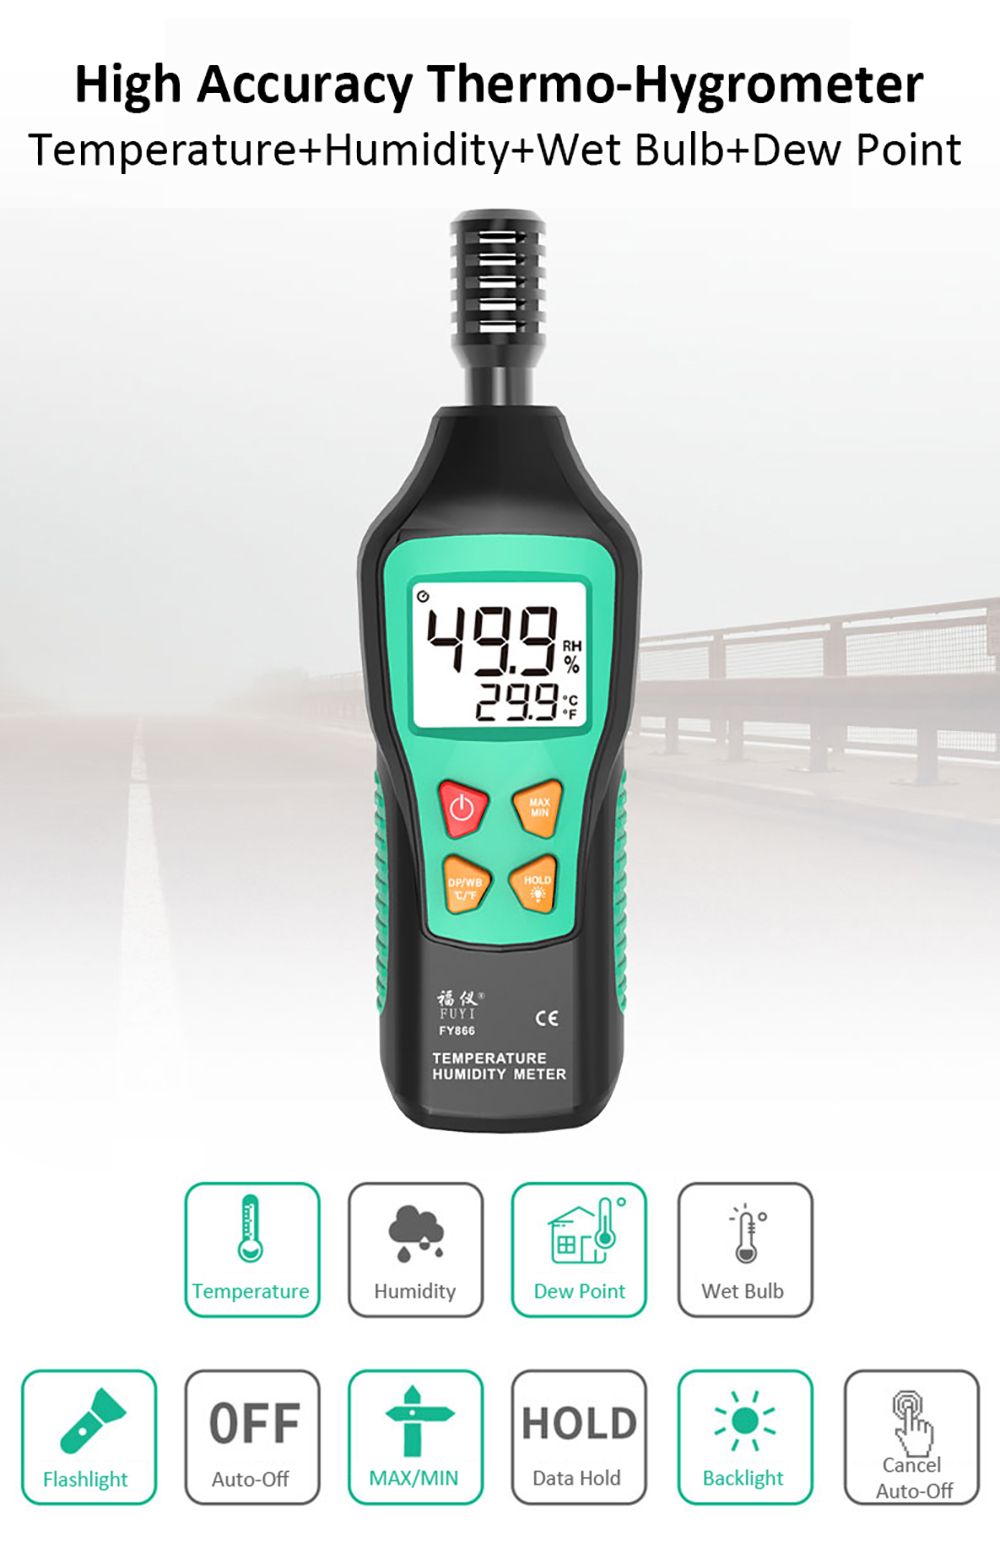 FUYI-FY866-Digital-Thermometer-Hygrometer-Mini-Weather-Station-Wet-Bulb-Dew-Point-Temperature-Meter--1584795